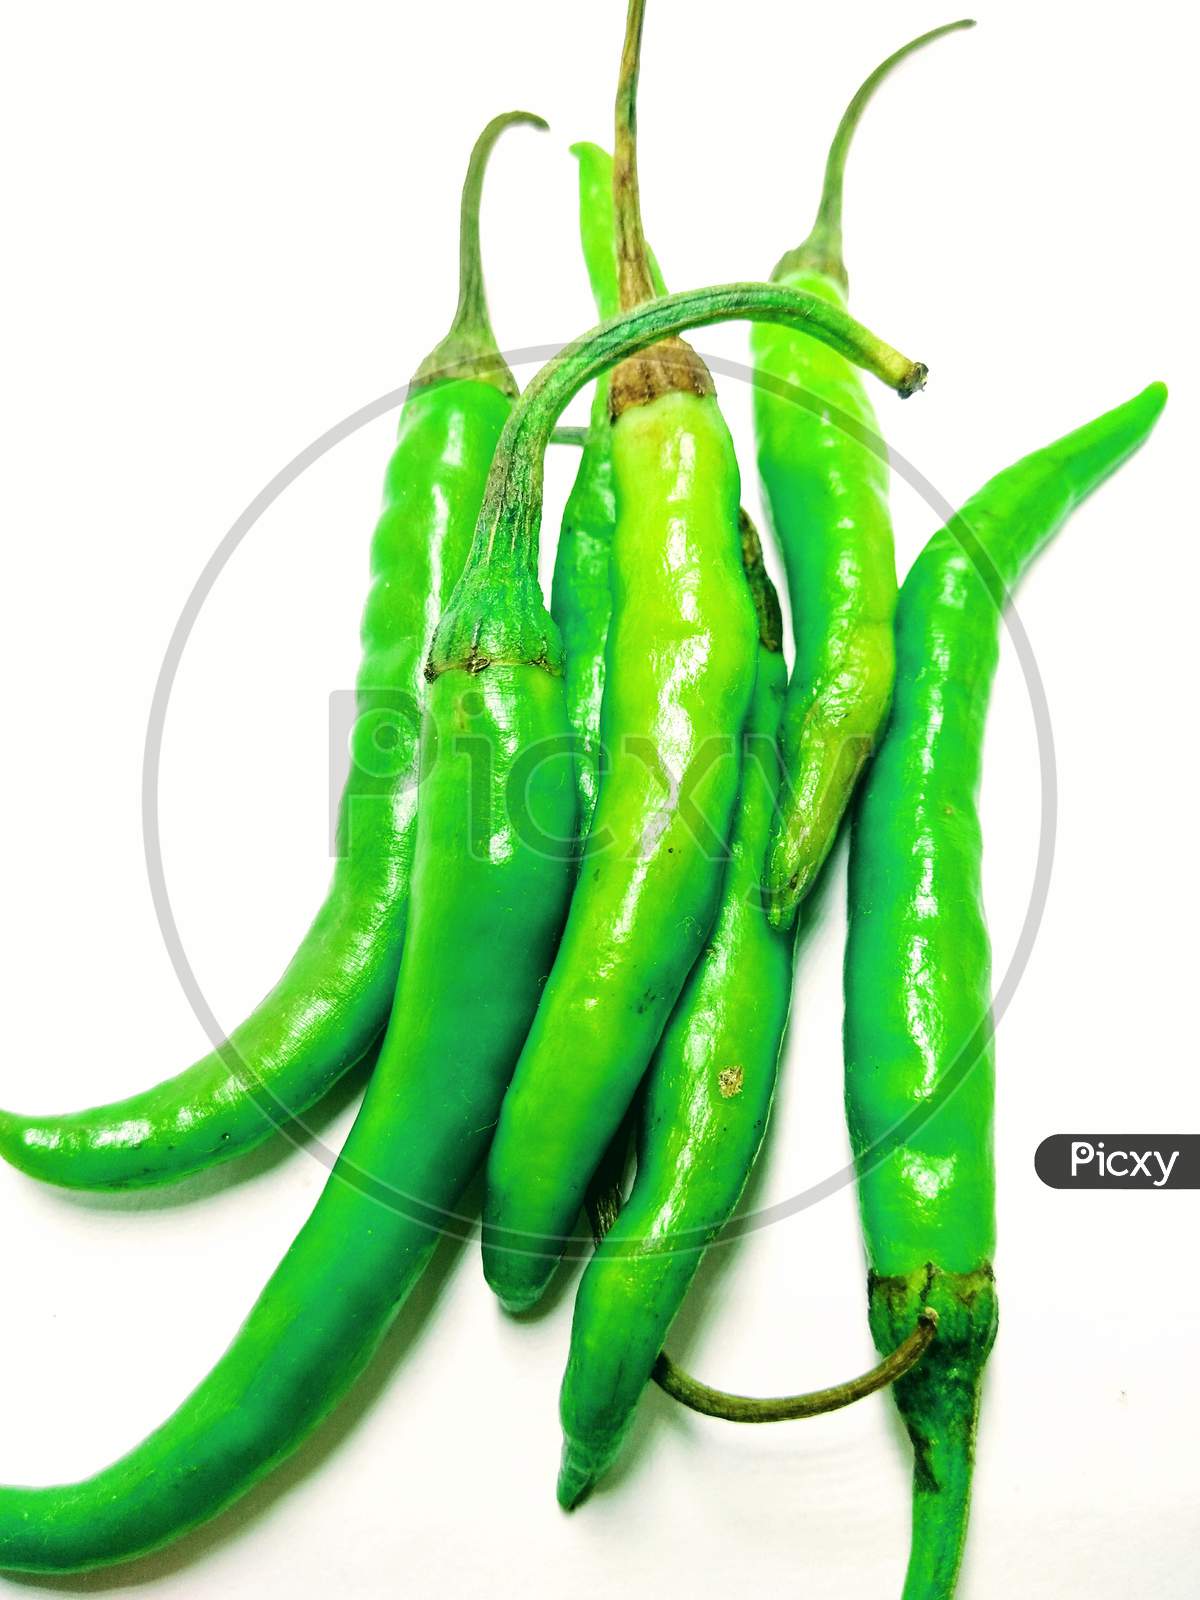 Green Chili Over an Isolated White Background